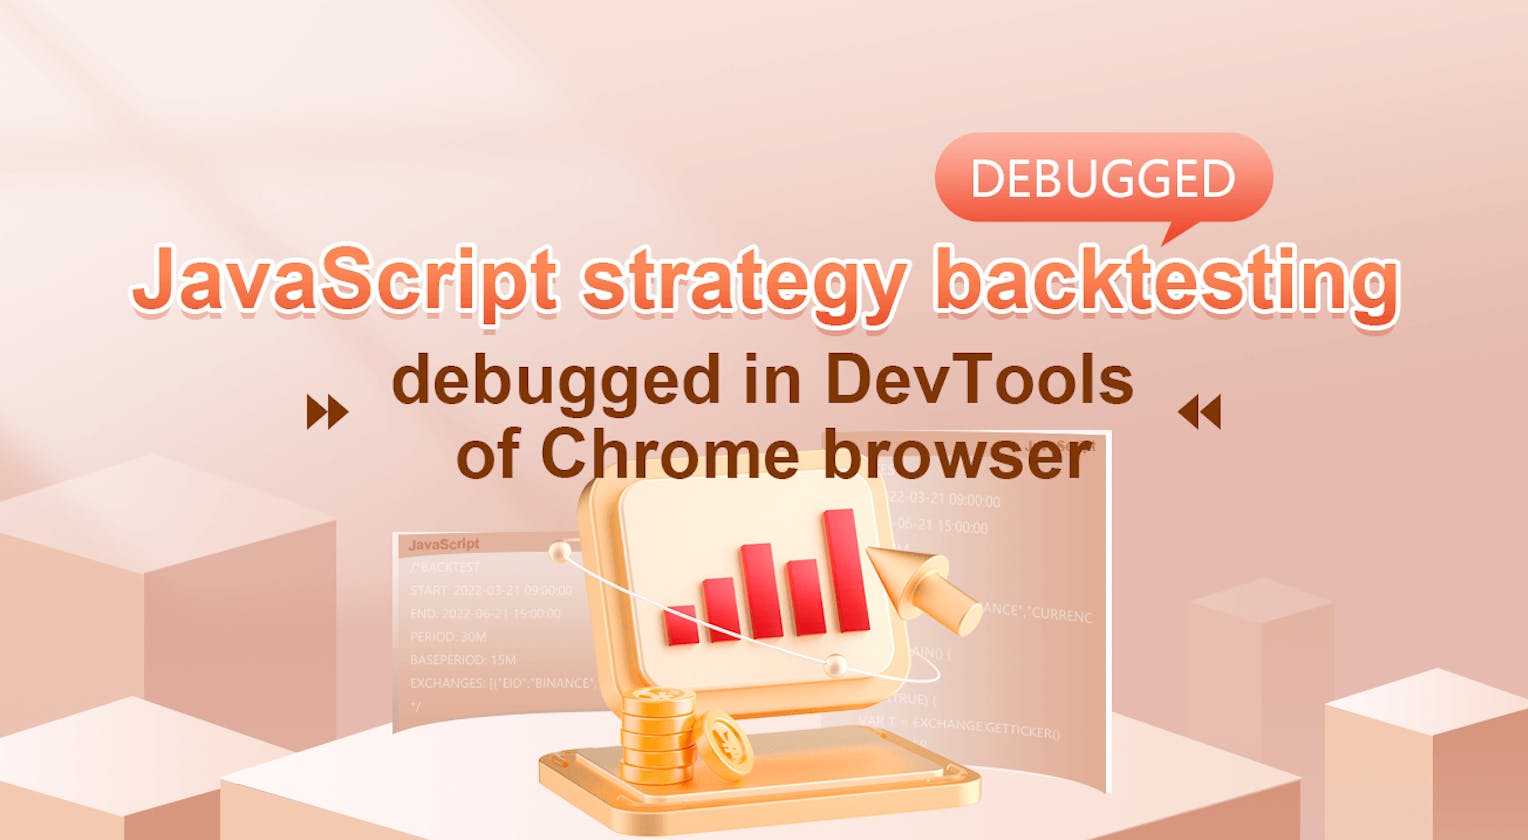 JavaScript strategy backtesting is debugged in DevTools or Chrome browser